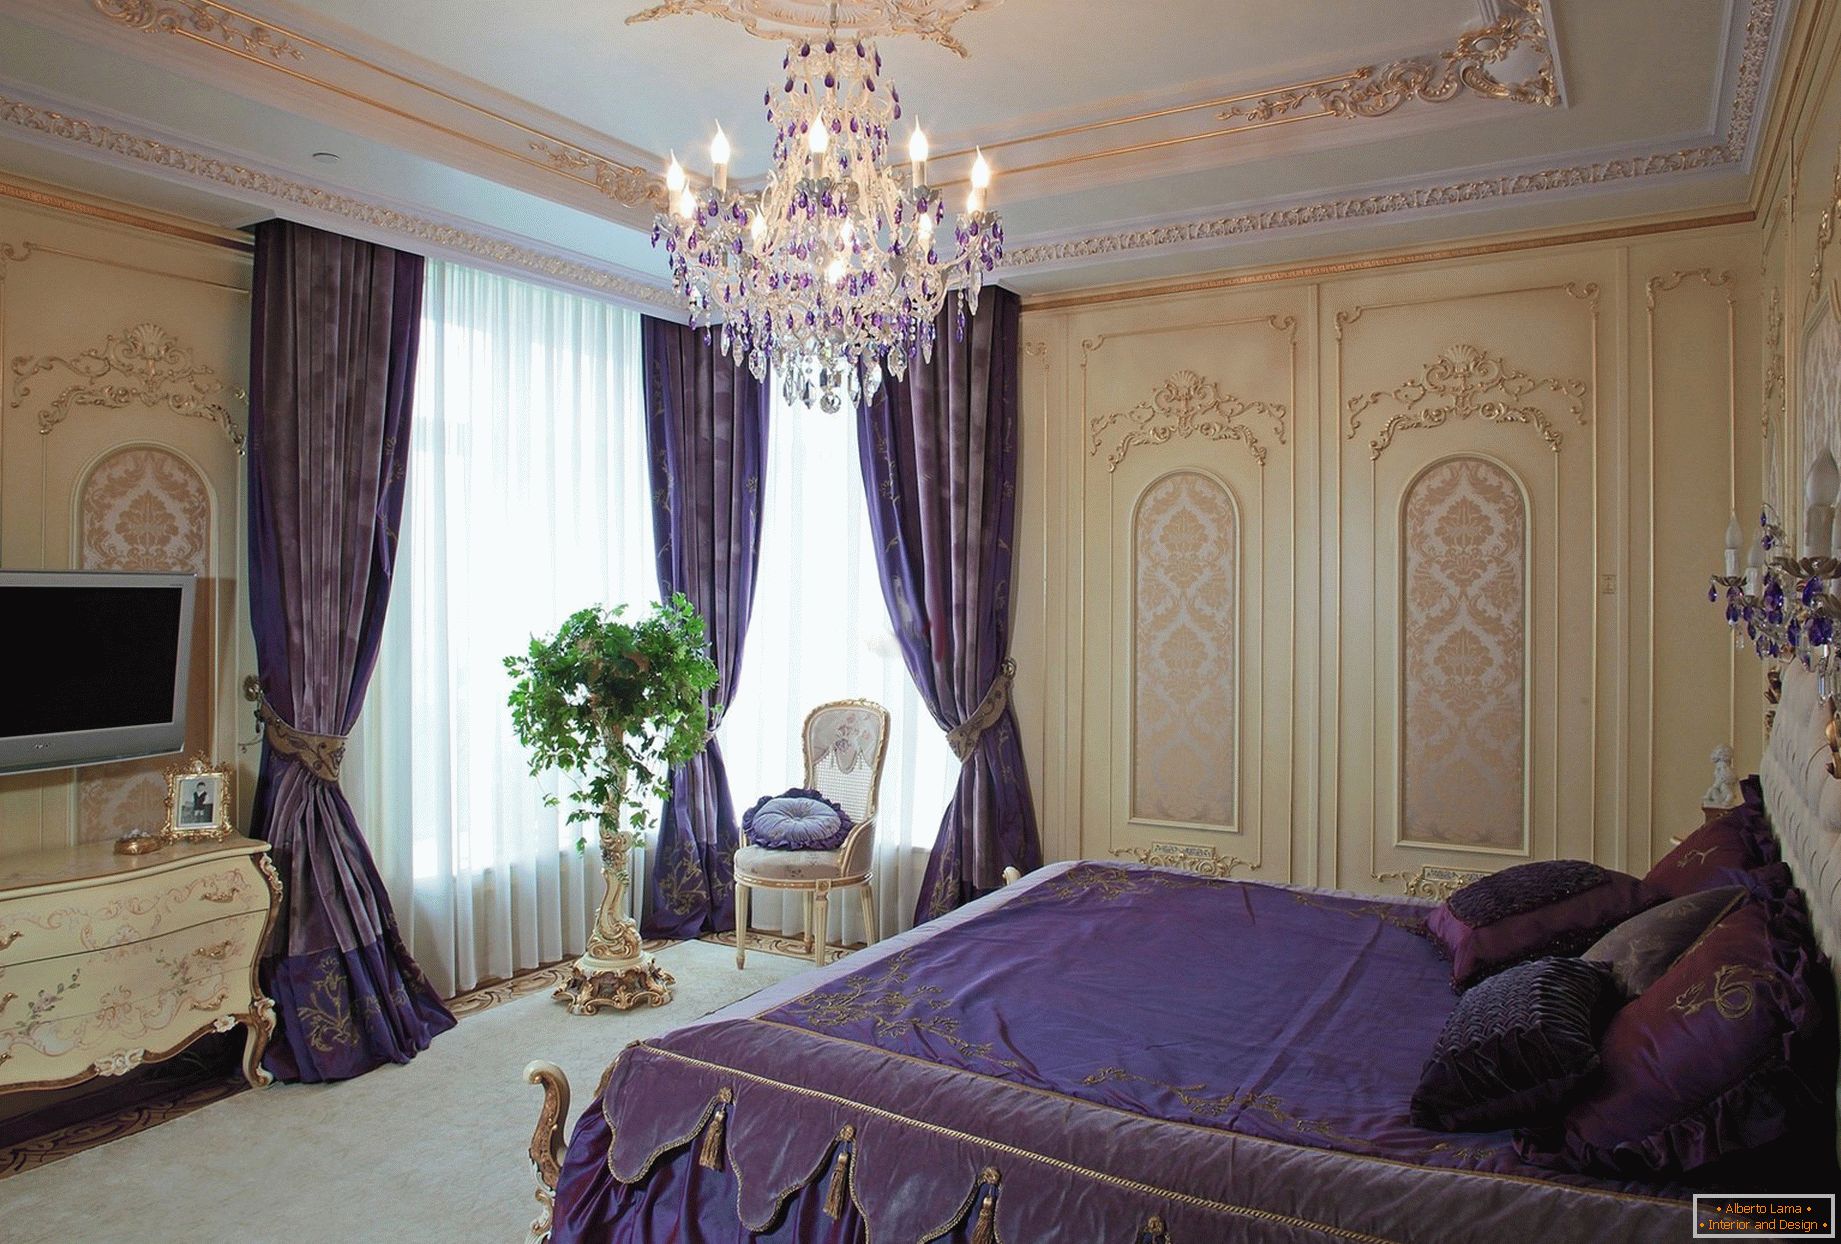 A room with a large bed